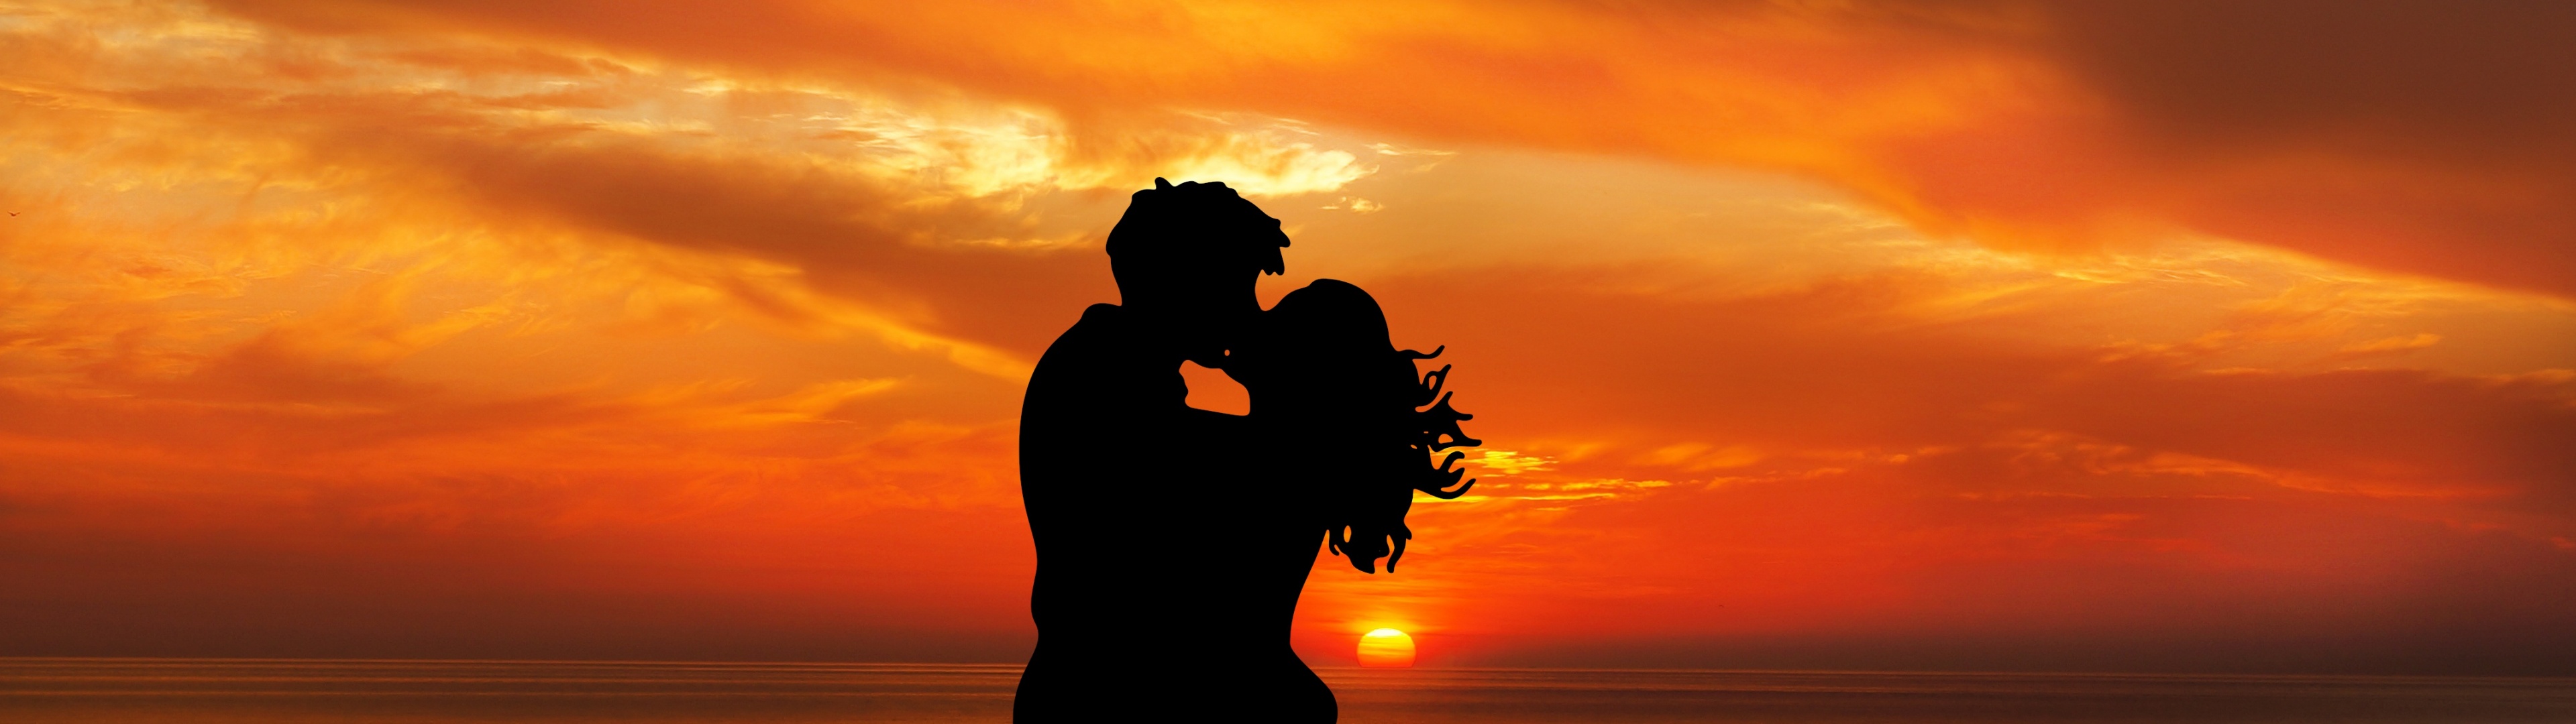 Download Kissing couple hd wallpaper for mobile laptop - Love and romance-  For Mobile Phone